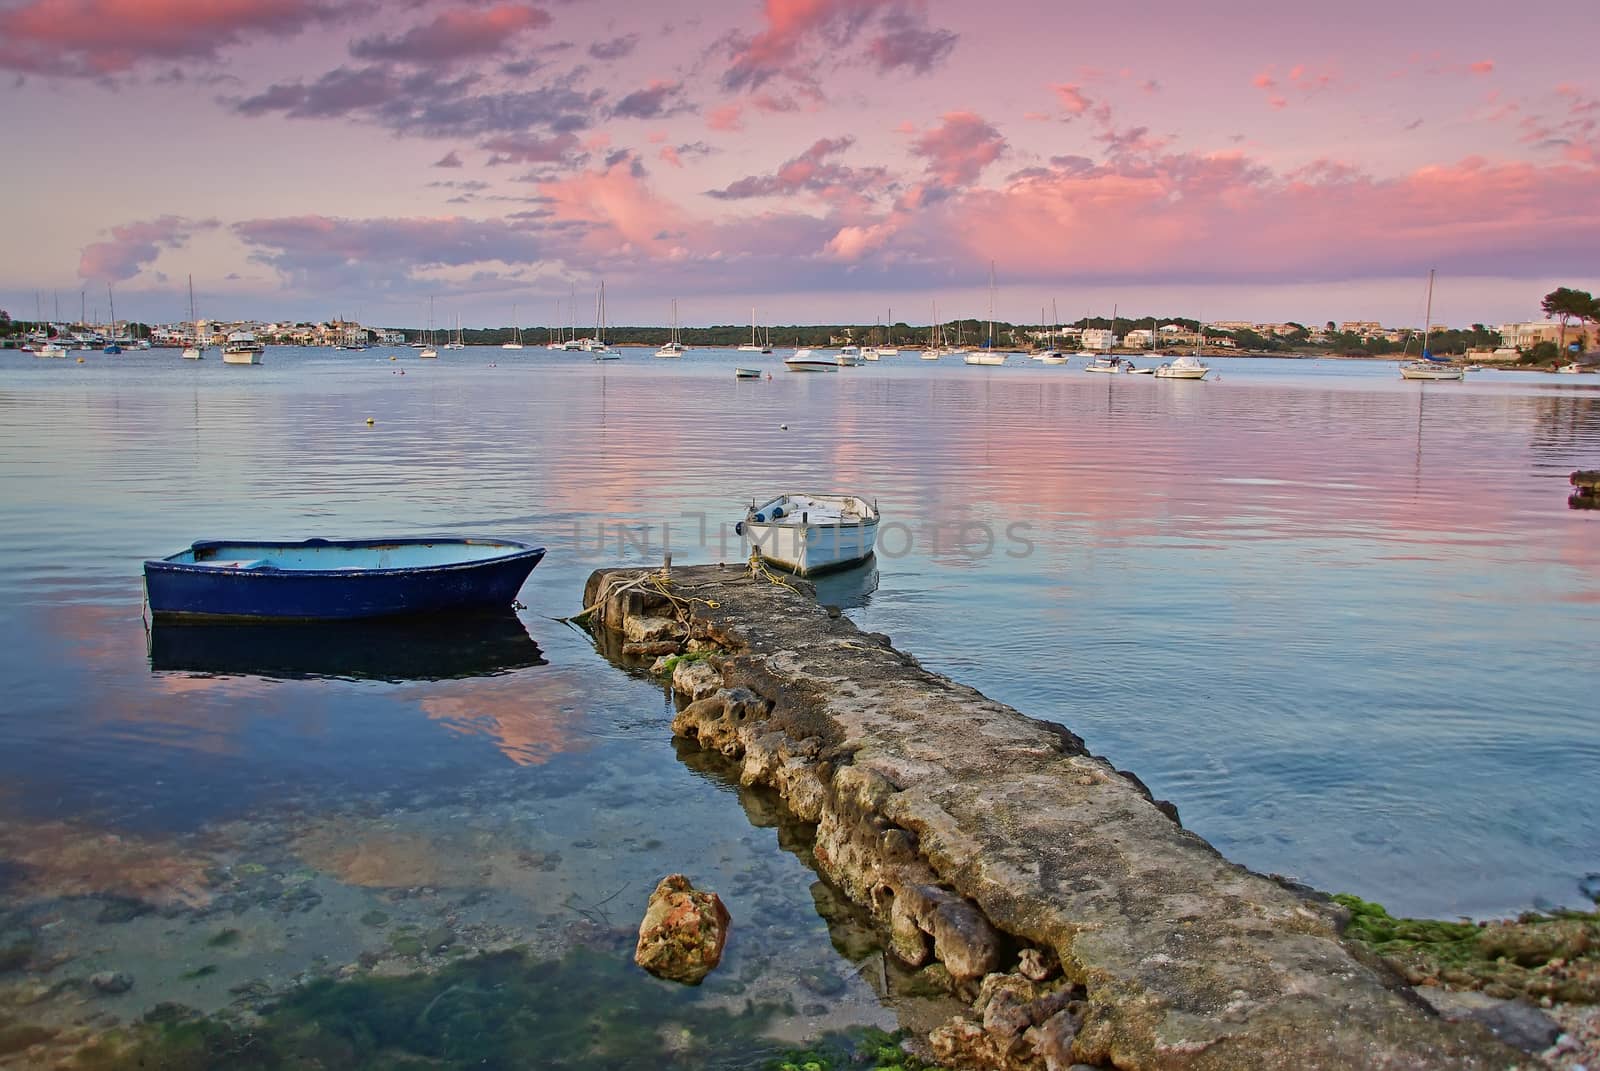 Red sky during the sunset in Porto Colom (Majorca - Spain)